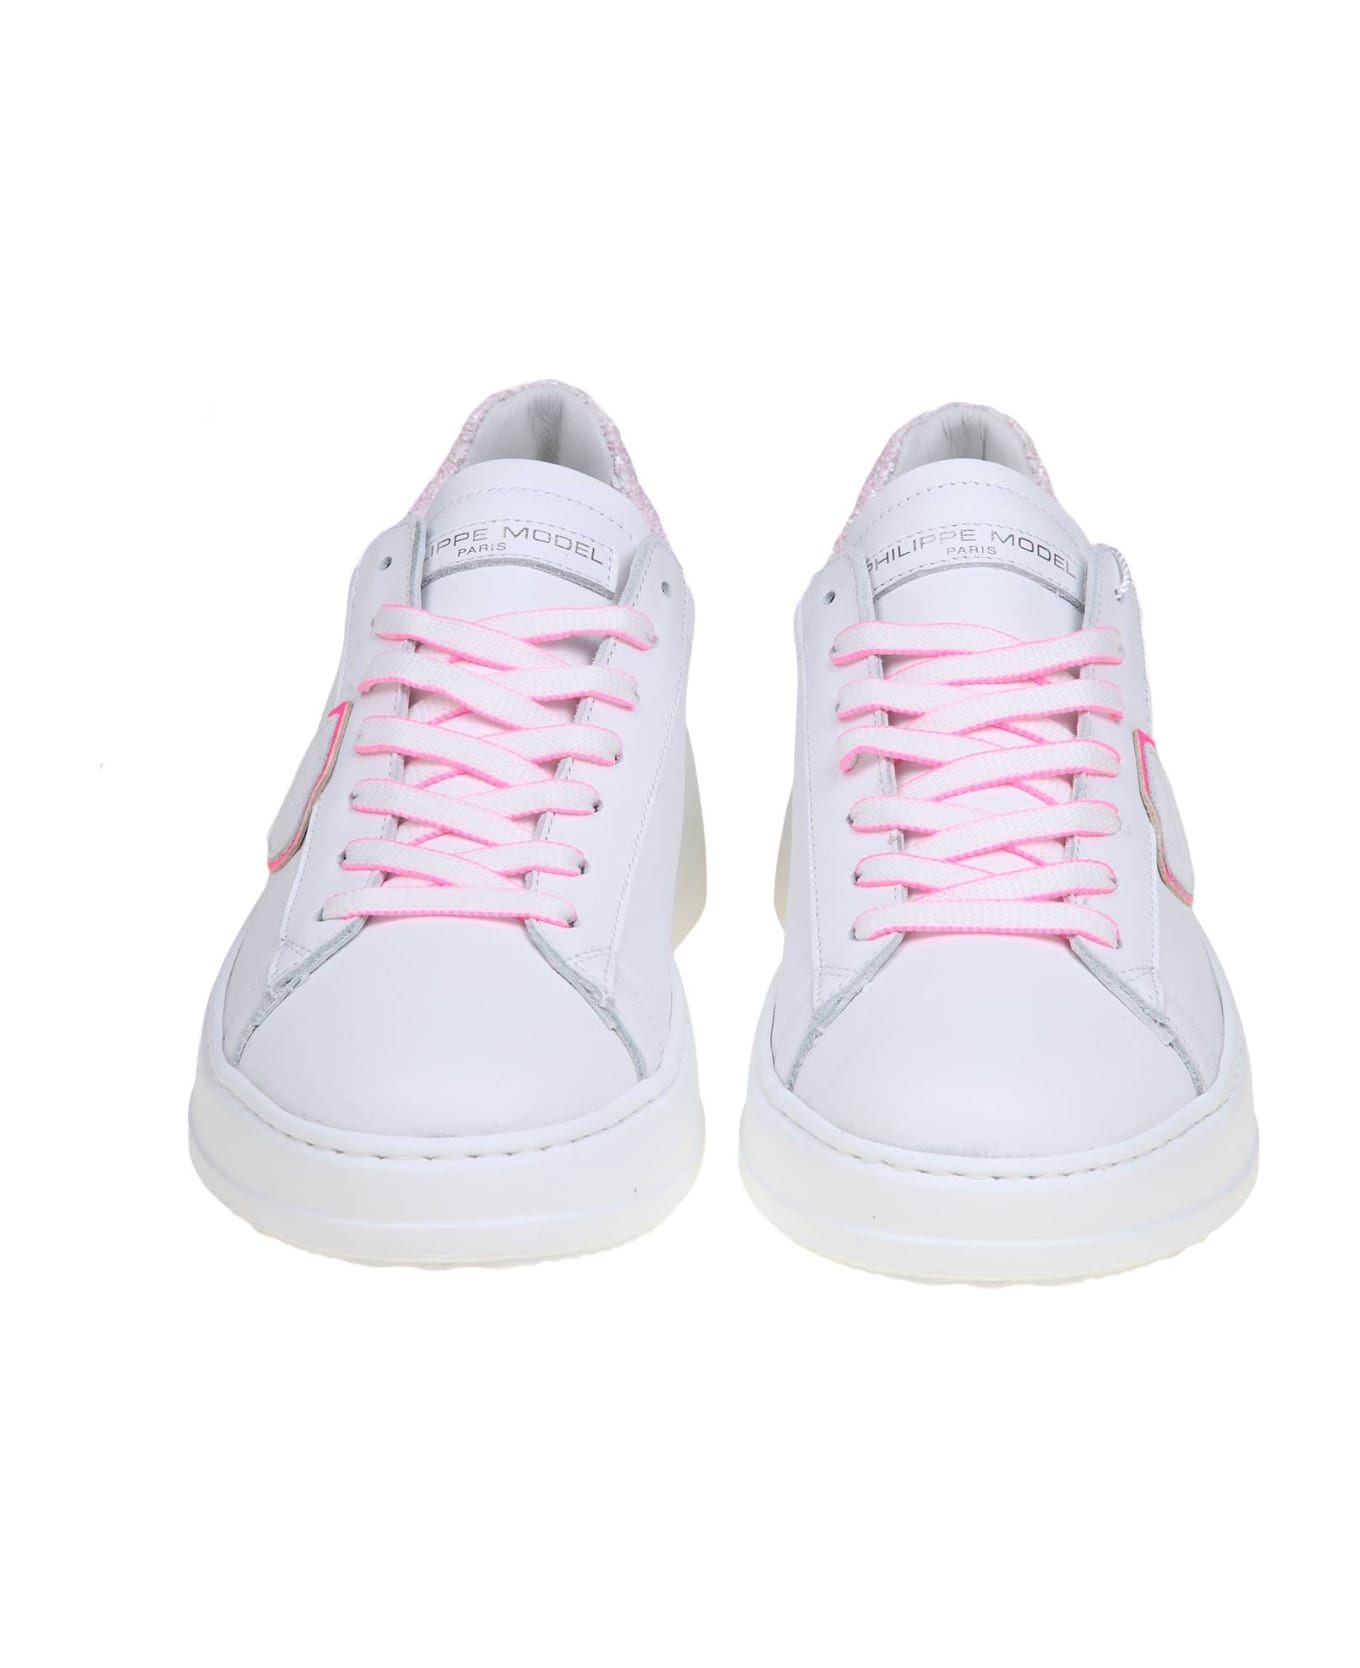 Philippe Model Tres Temple Low In White And Fuchsia Leather - Blanc/fucsia スニーカー